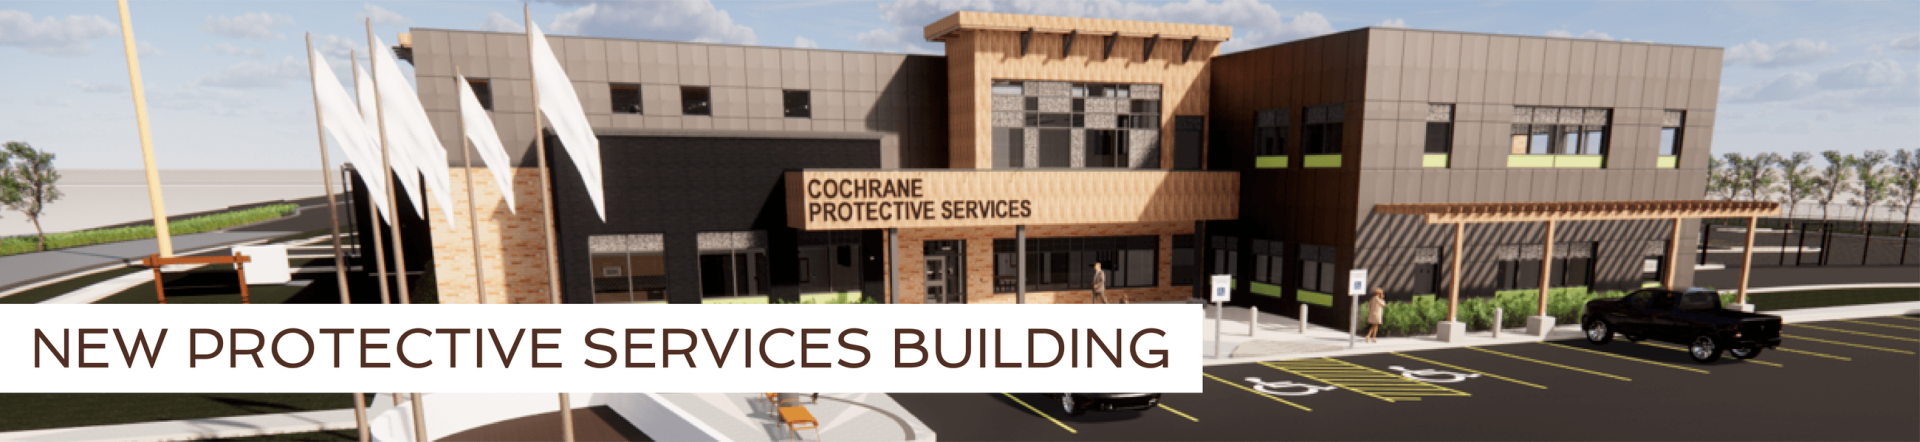 Exterior building rendering of new protective services building.